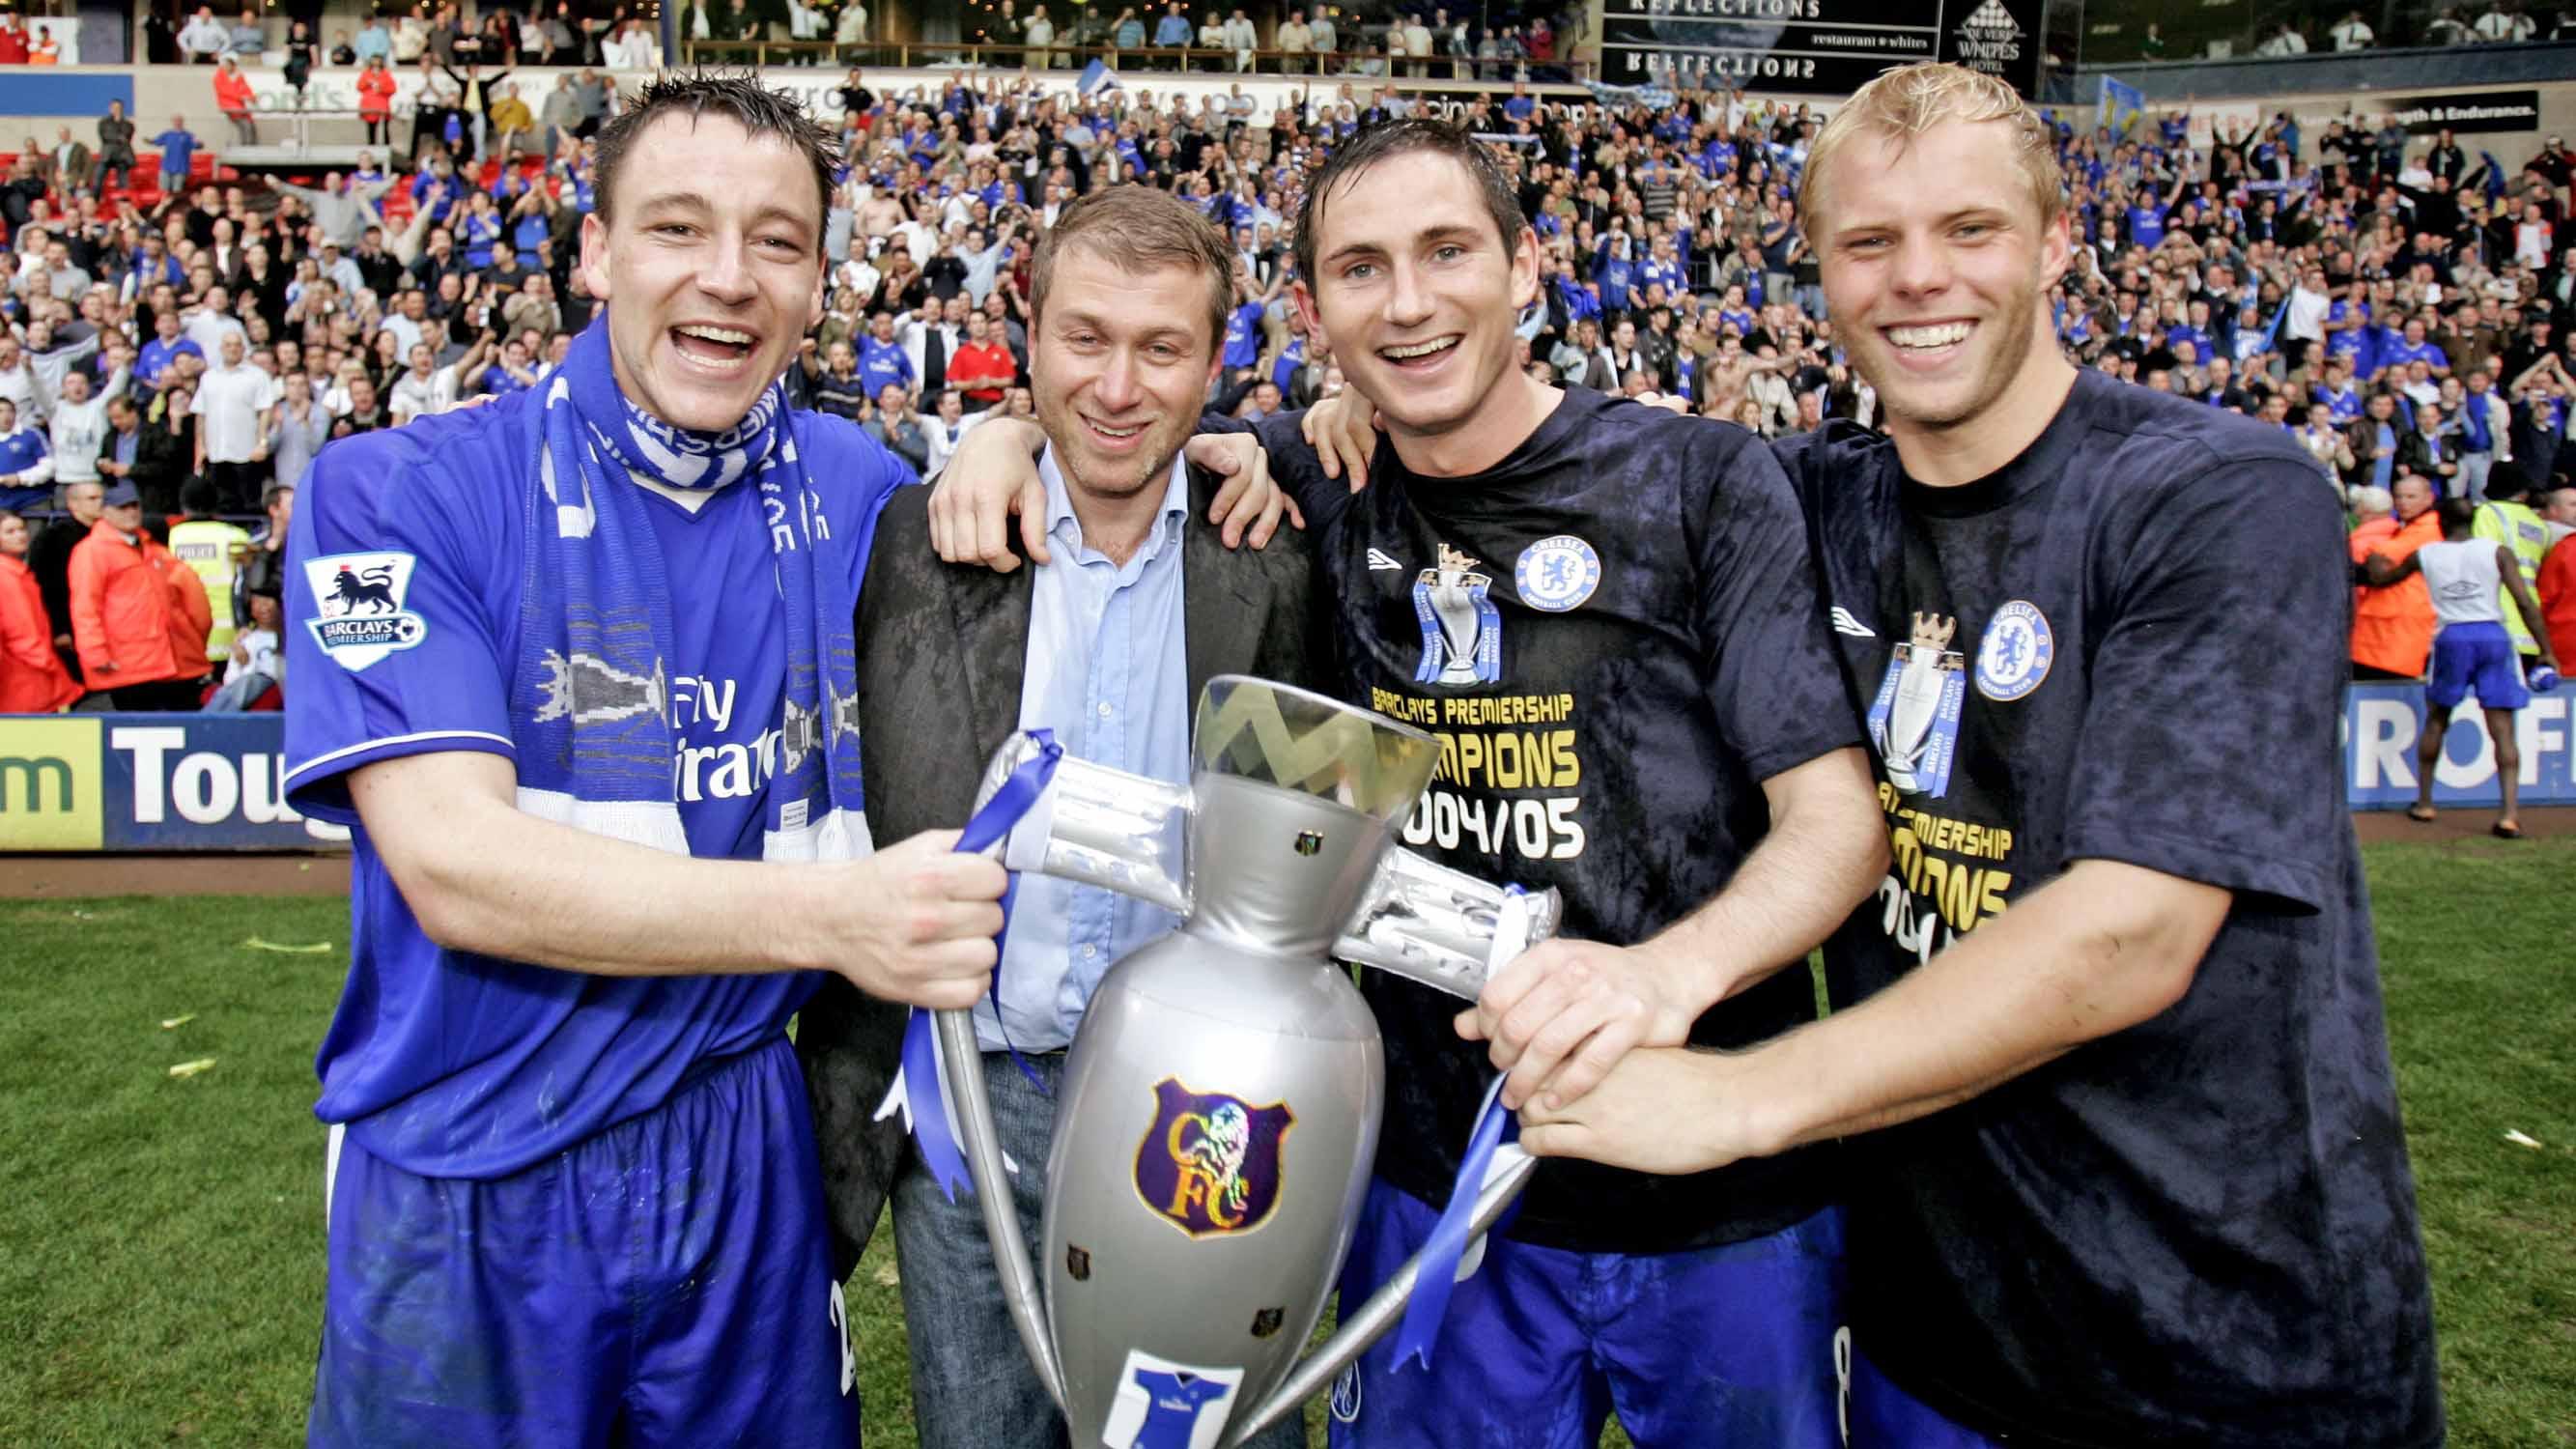 Chelsea on SALE: Roman Abramovich, Frank Lampard, John Terry lifting a trophy for Chelsea